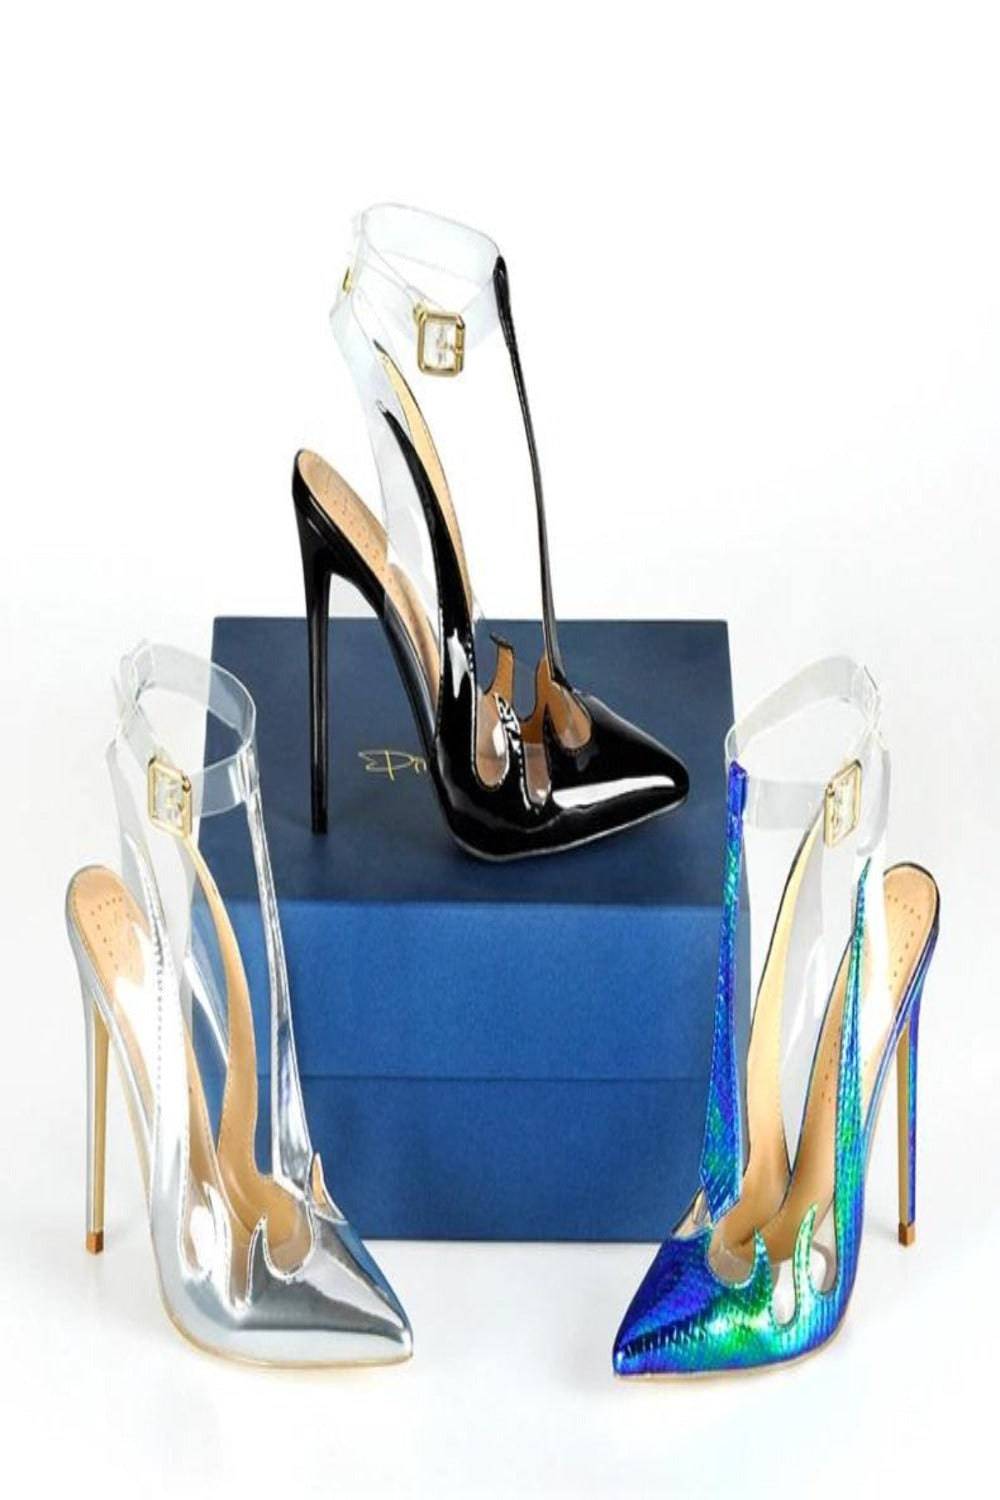 Don't Put The Fire Out Pointed Toe iridescent Heels - TGC Boutique - Shoes